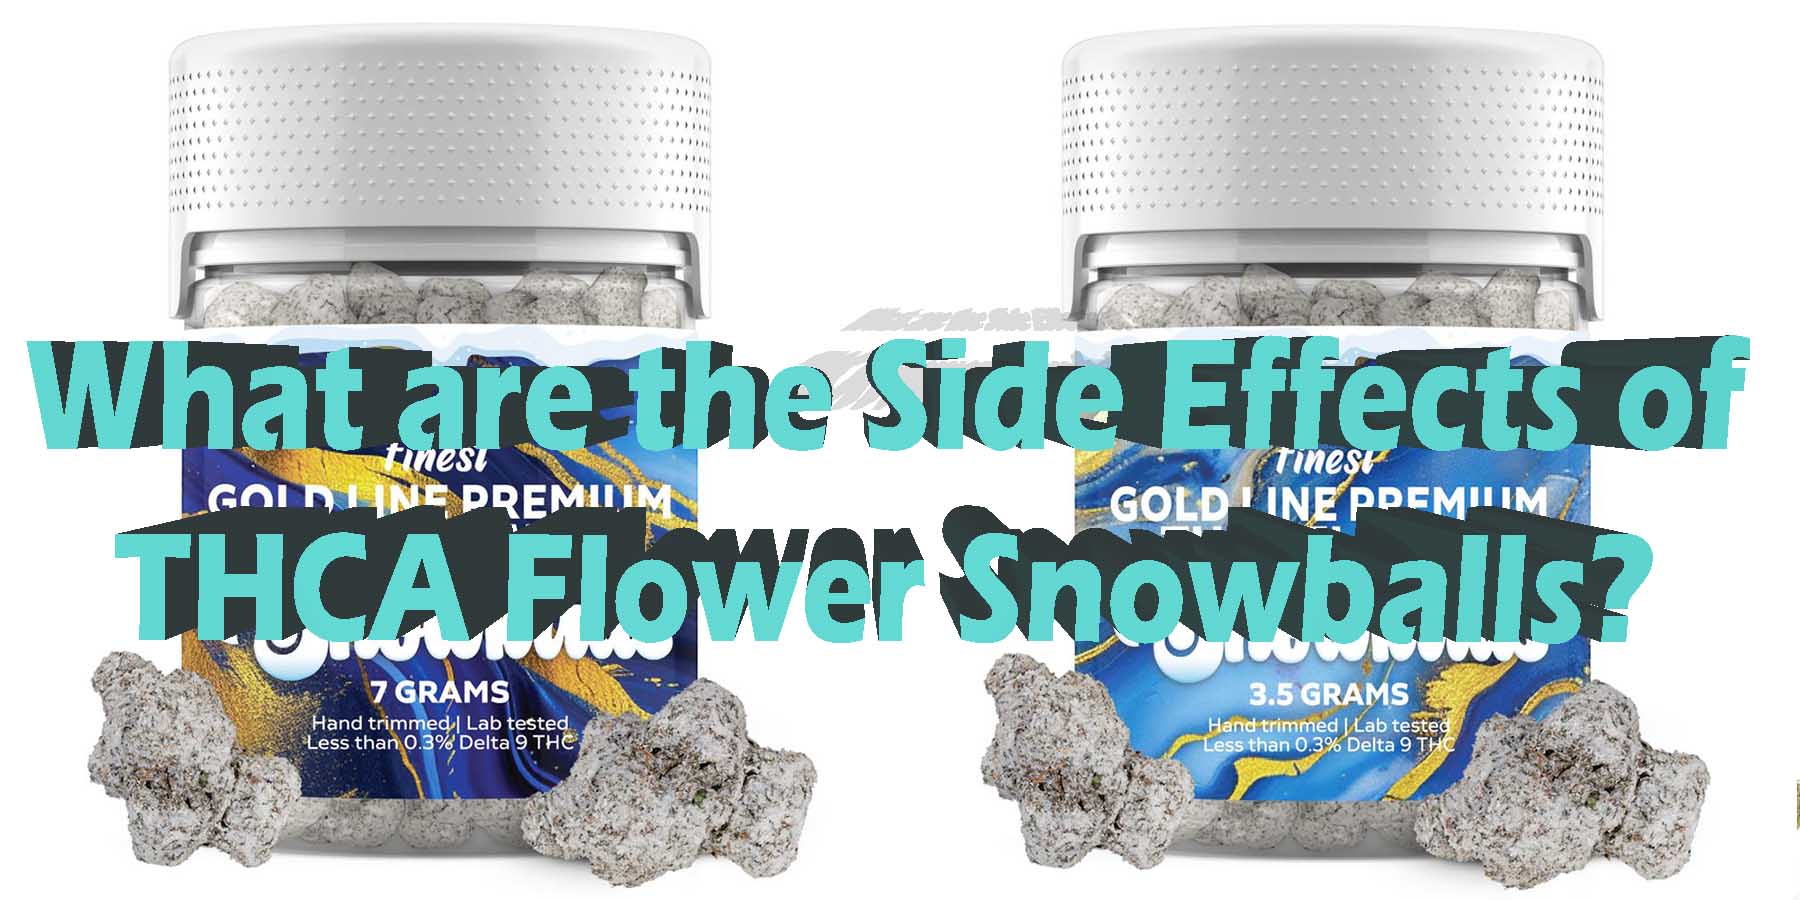 What are the Side Effects of THCA Flower Snowballs LowestPrice Coupon Discount For Smoking Best High Smoke Shop Online Near Me Online Smoke Shop StrongestBrand Best Smoke Bloomz